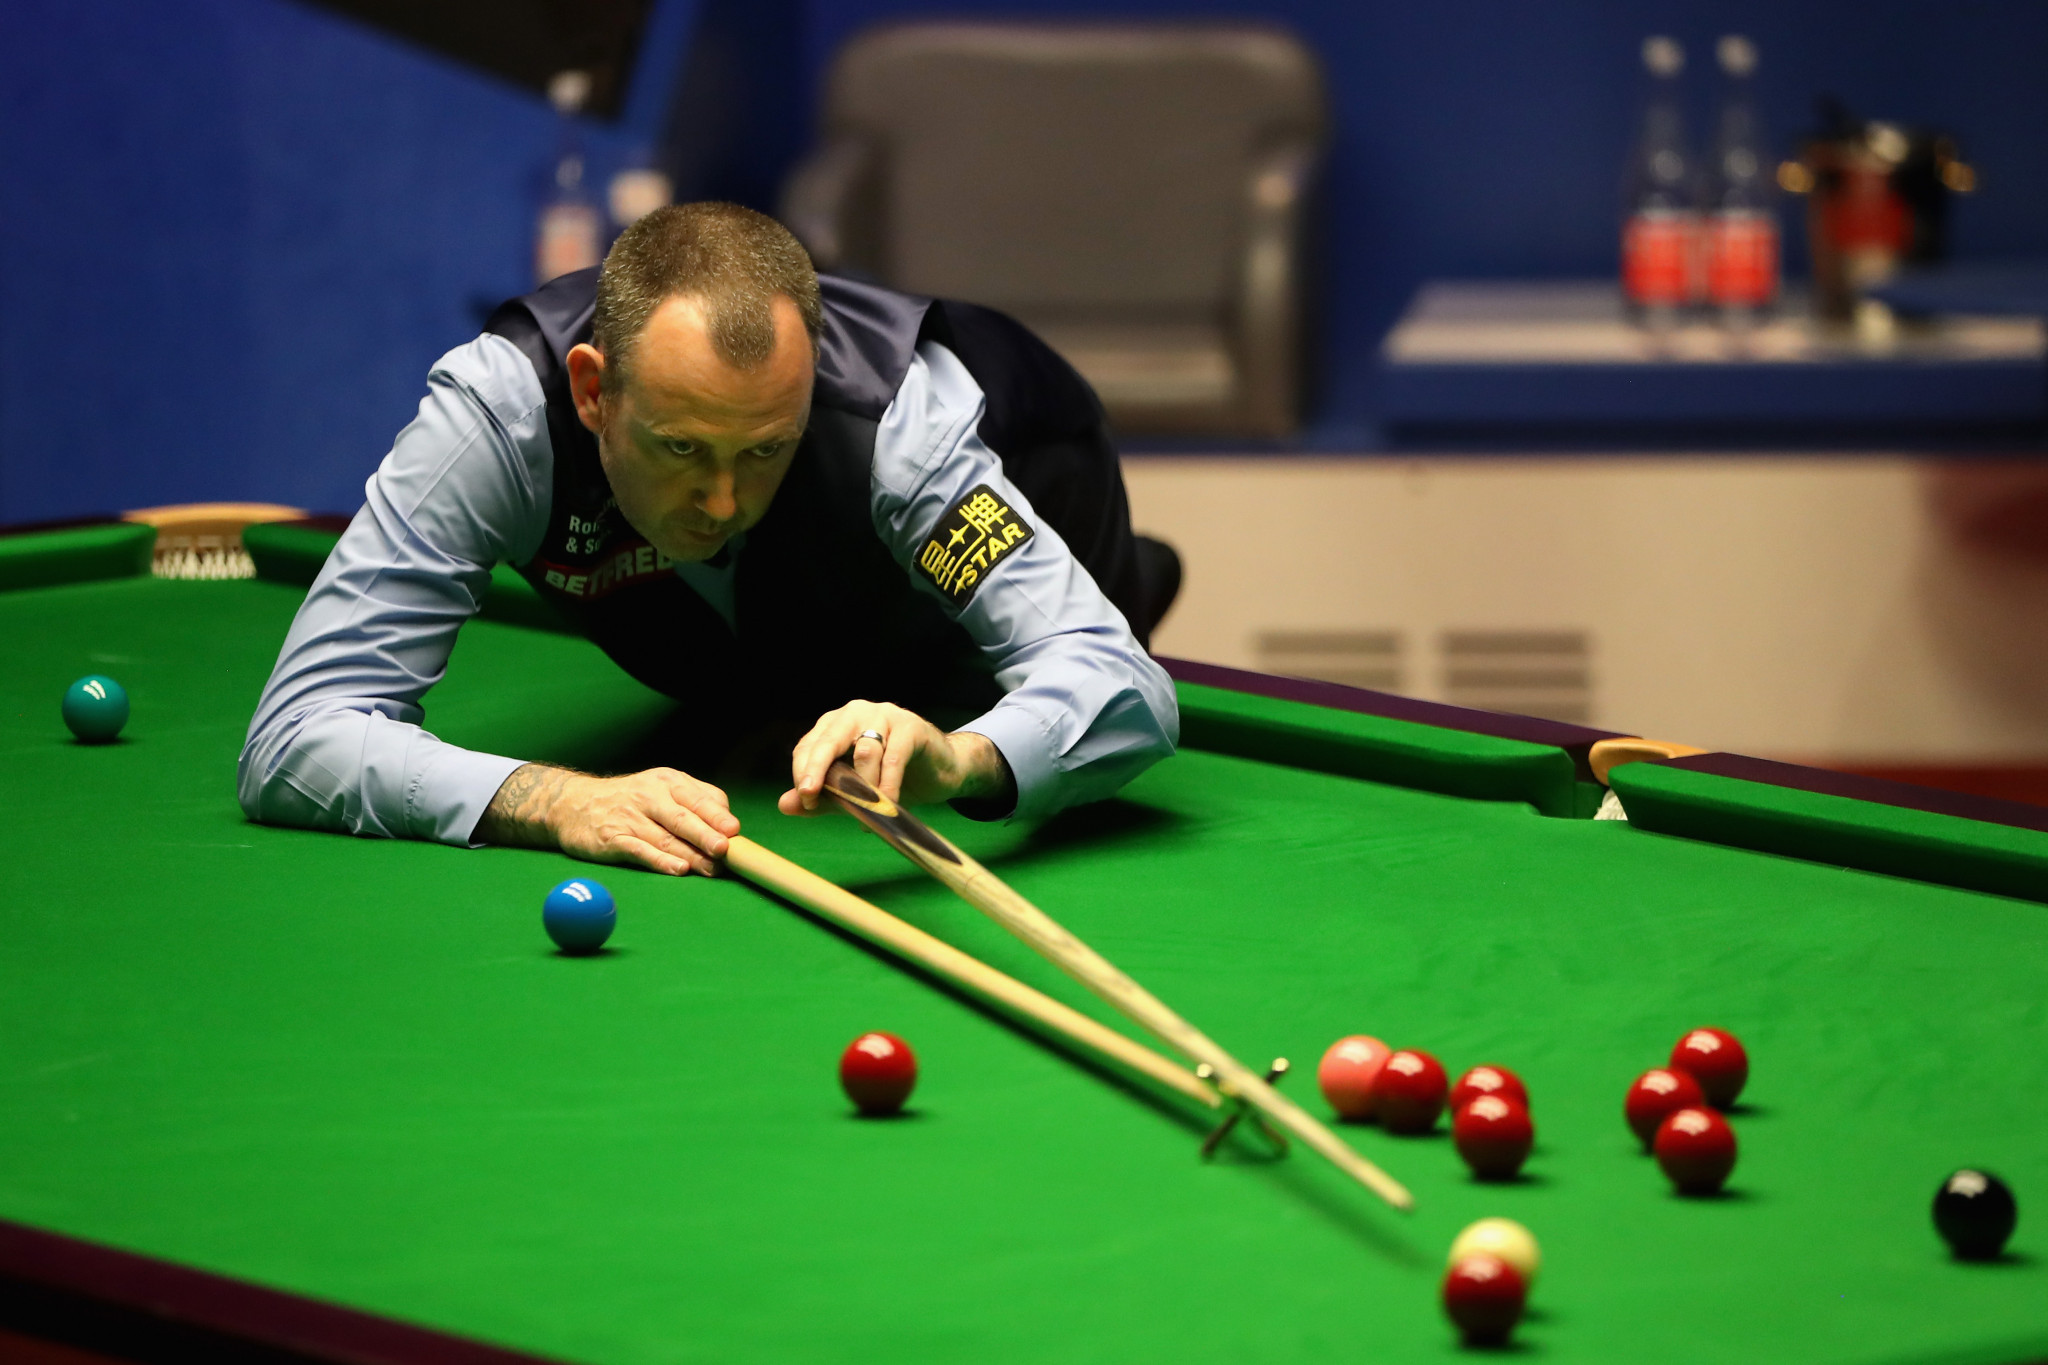 Defending world snooker champion Williams cleared by hospital after chest pains - but then cleared out by Gilbert 